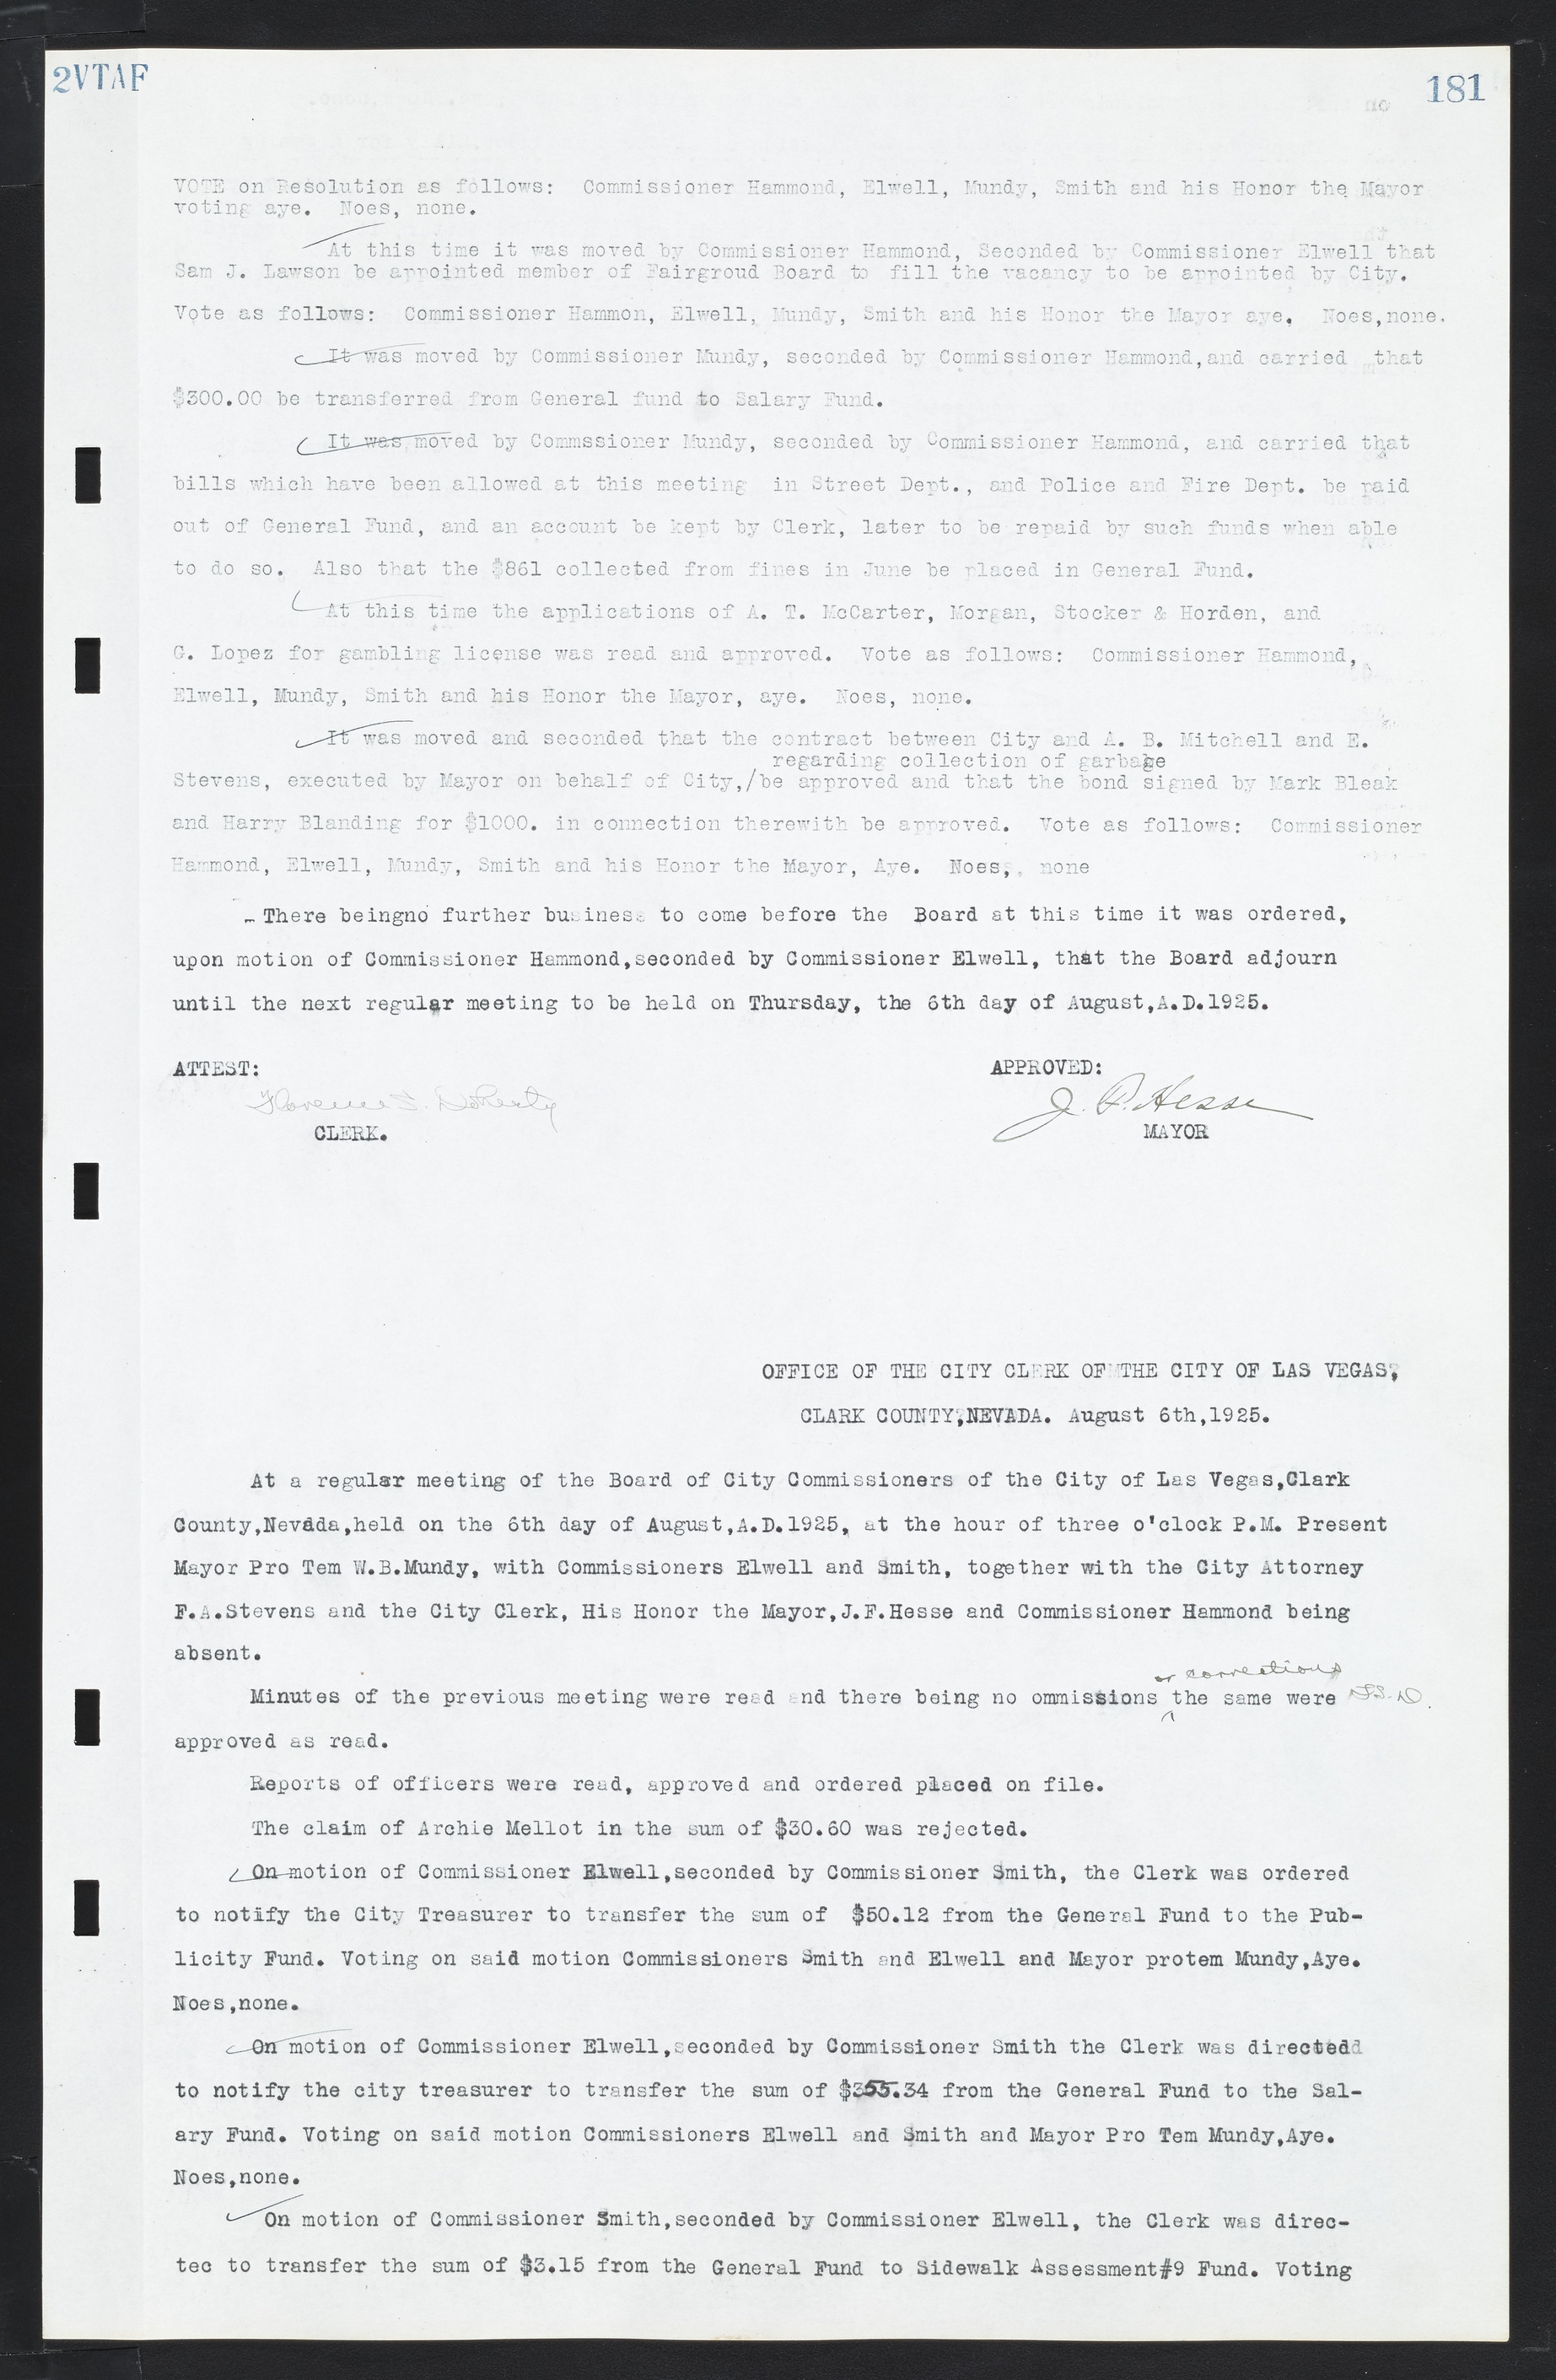 Las Vegas City Commission Minutes, March 1, 1922 to May 10, 1929, lvc000002-188